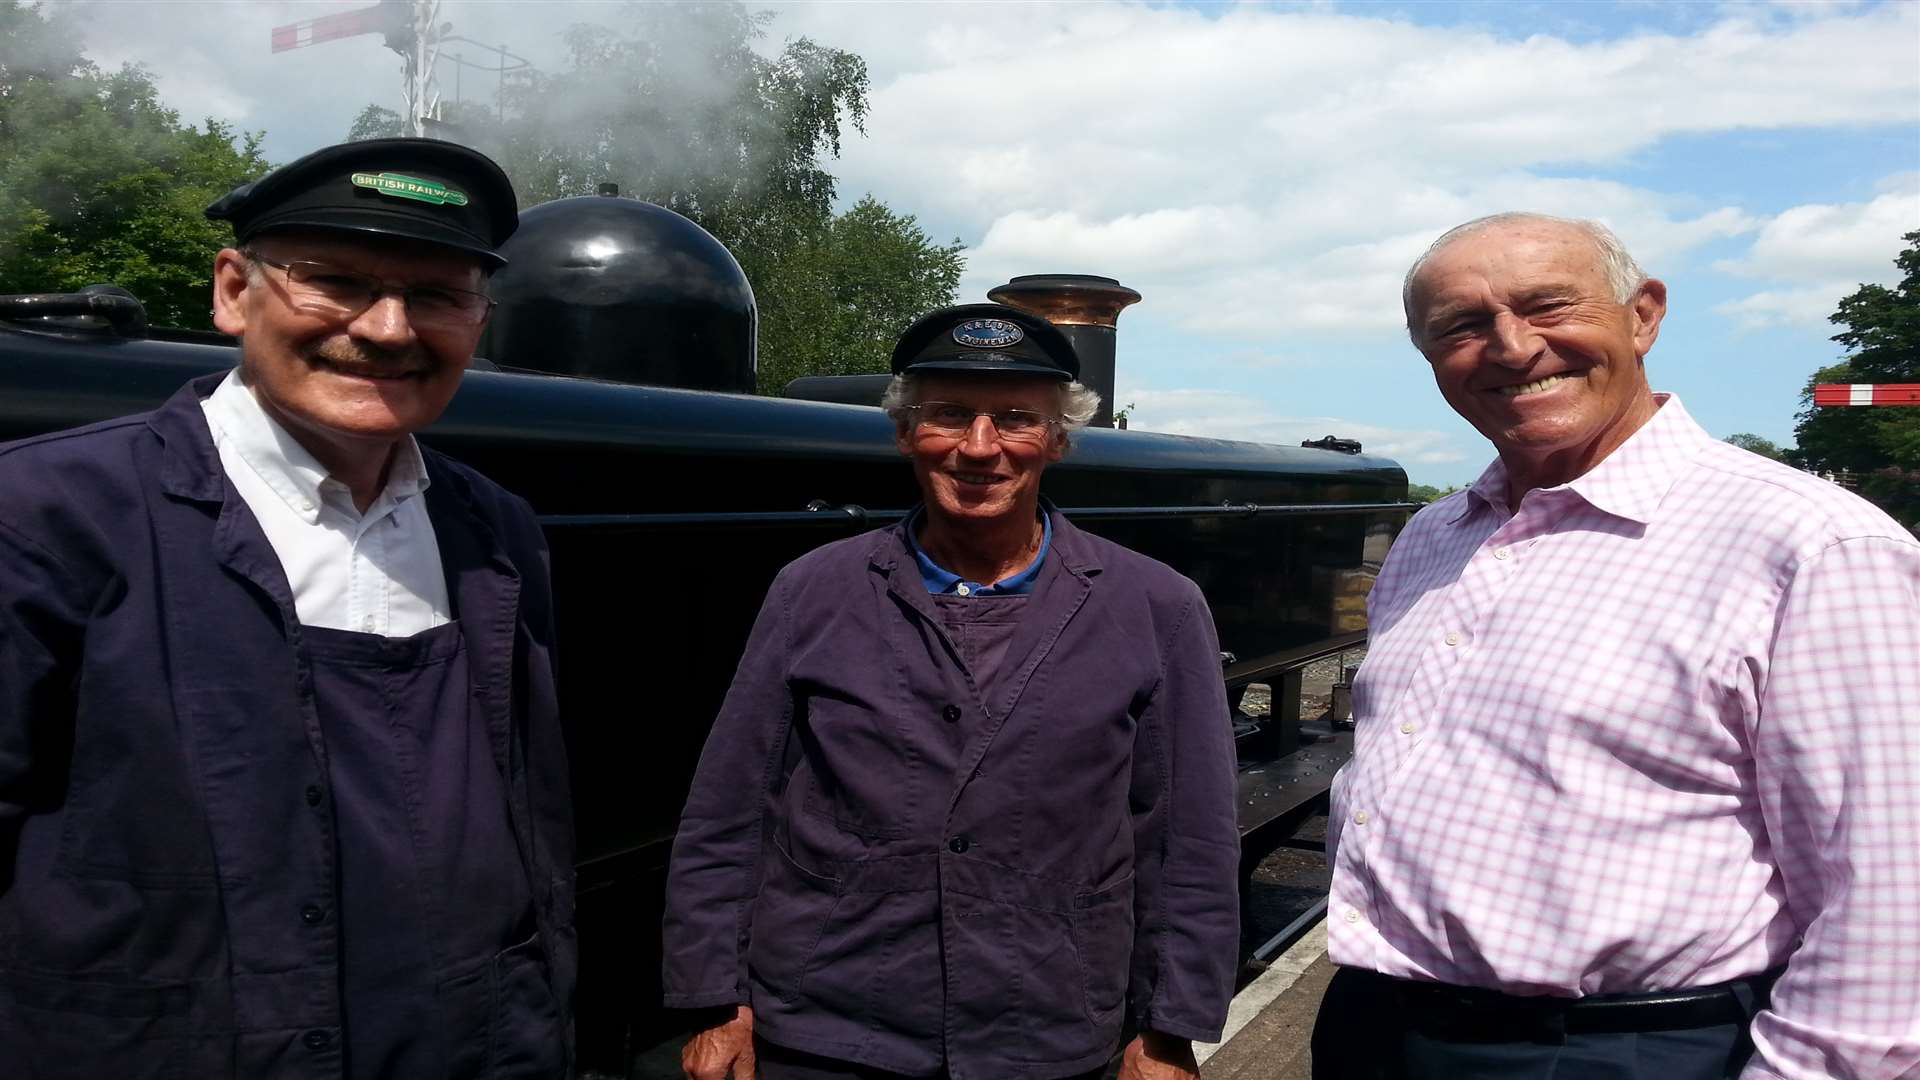 Fireman Tom White and driver Tom Featherstone chat with Len Goodman at the Kent & East Sussex Railway .Picture: Chris Davey.